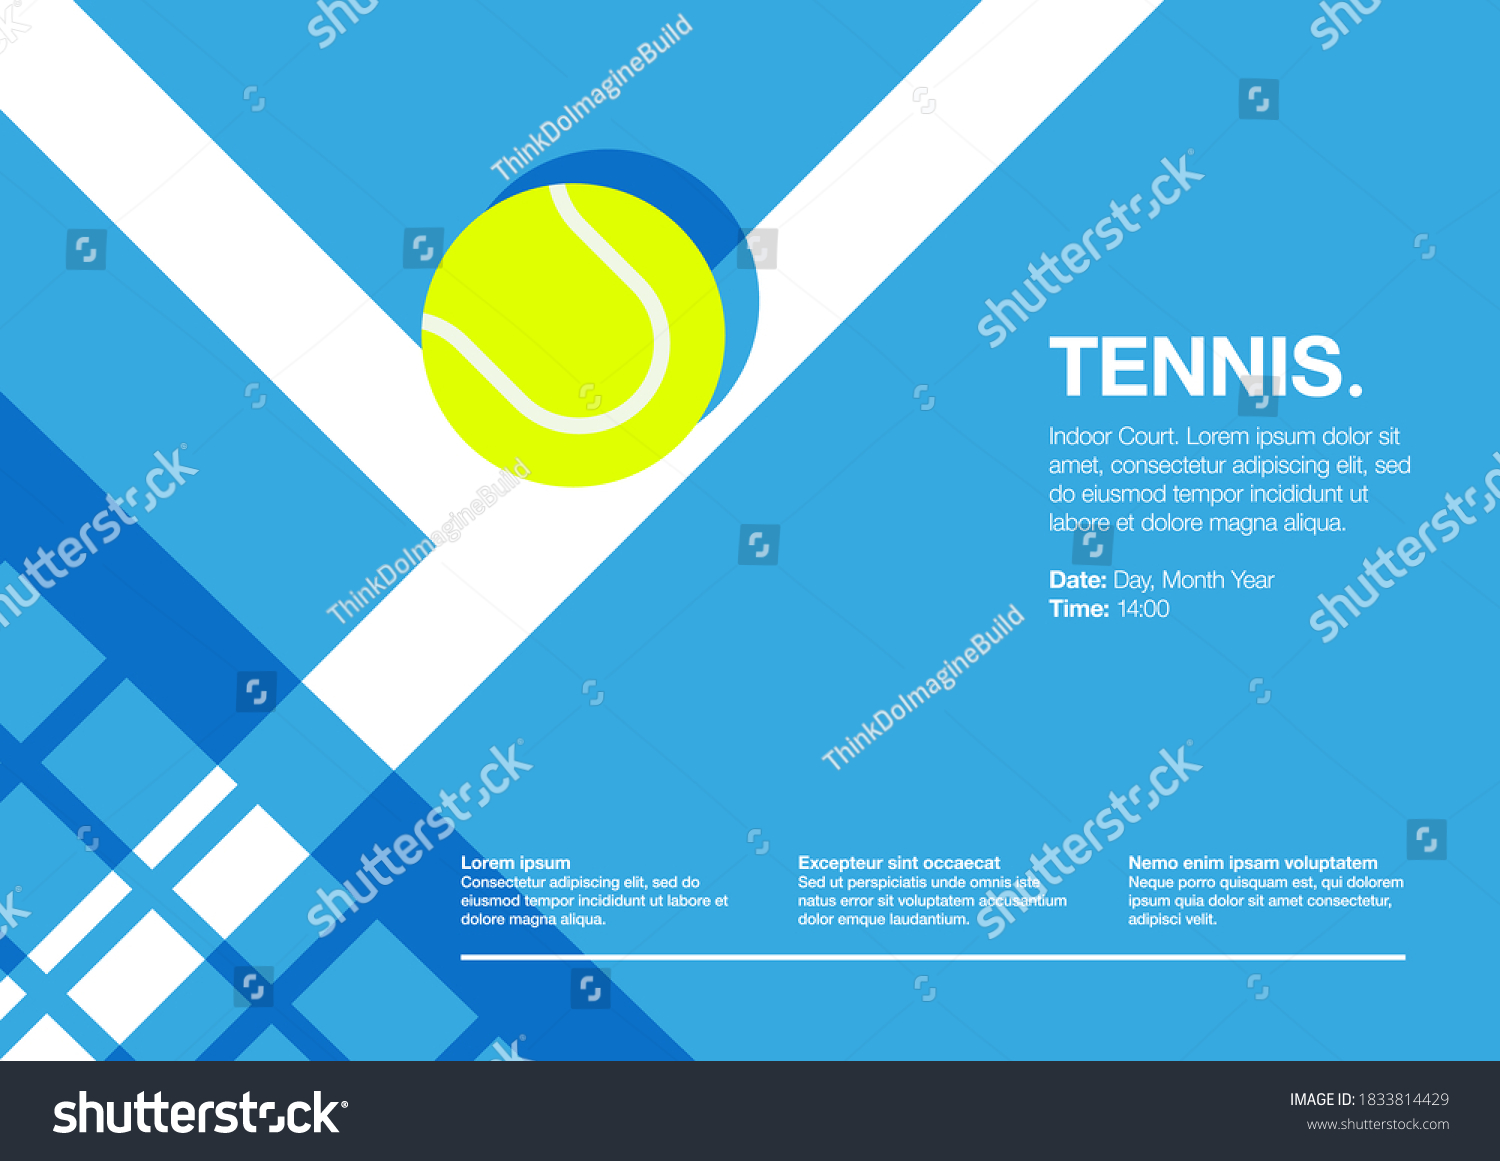 Tennis Championship and Tournament Landscape Poster. Indoor, Blue, Indoor Court. Ball on the Line. Net Shadow on floor. Close up. Flat, Simple, Retro style - Vector #1833814429